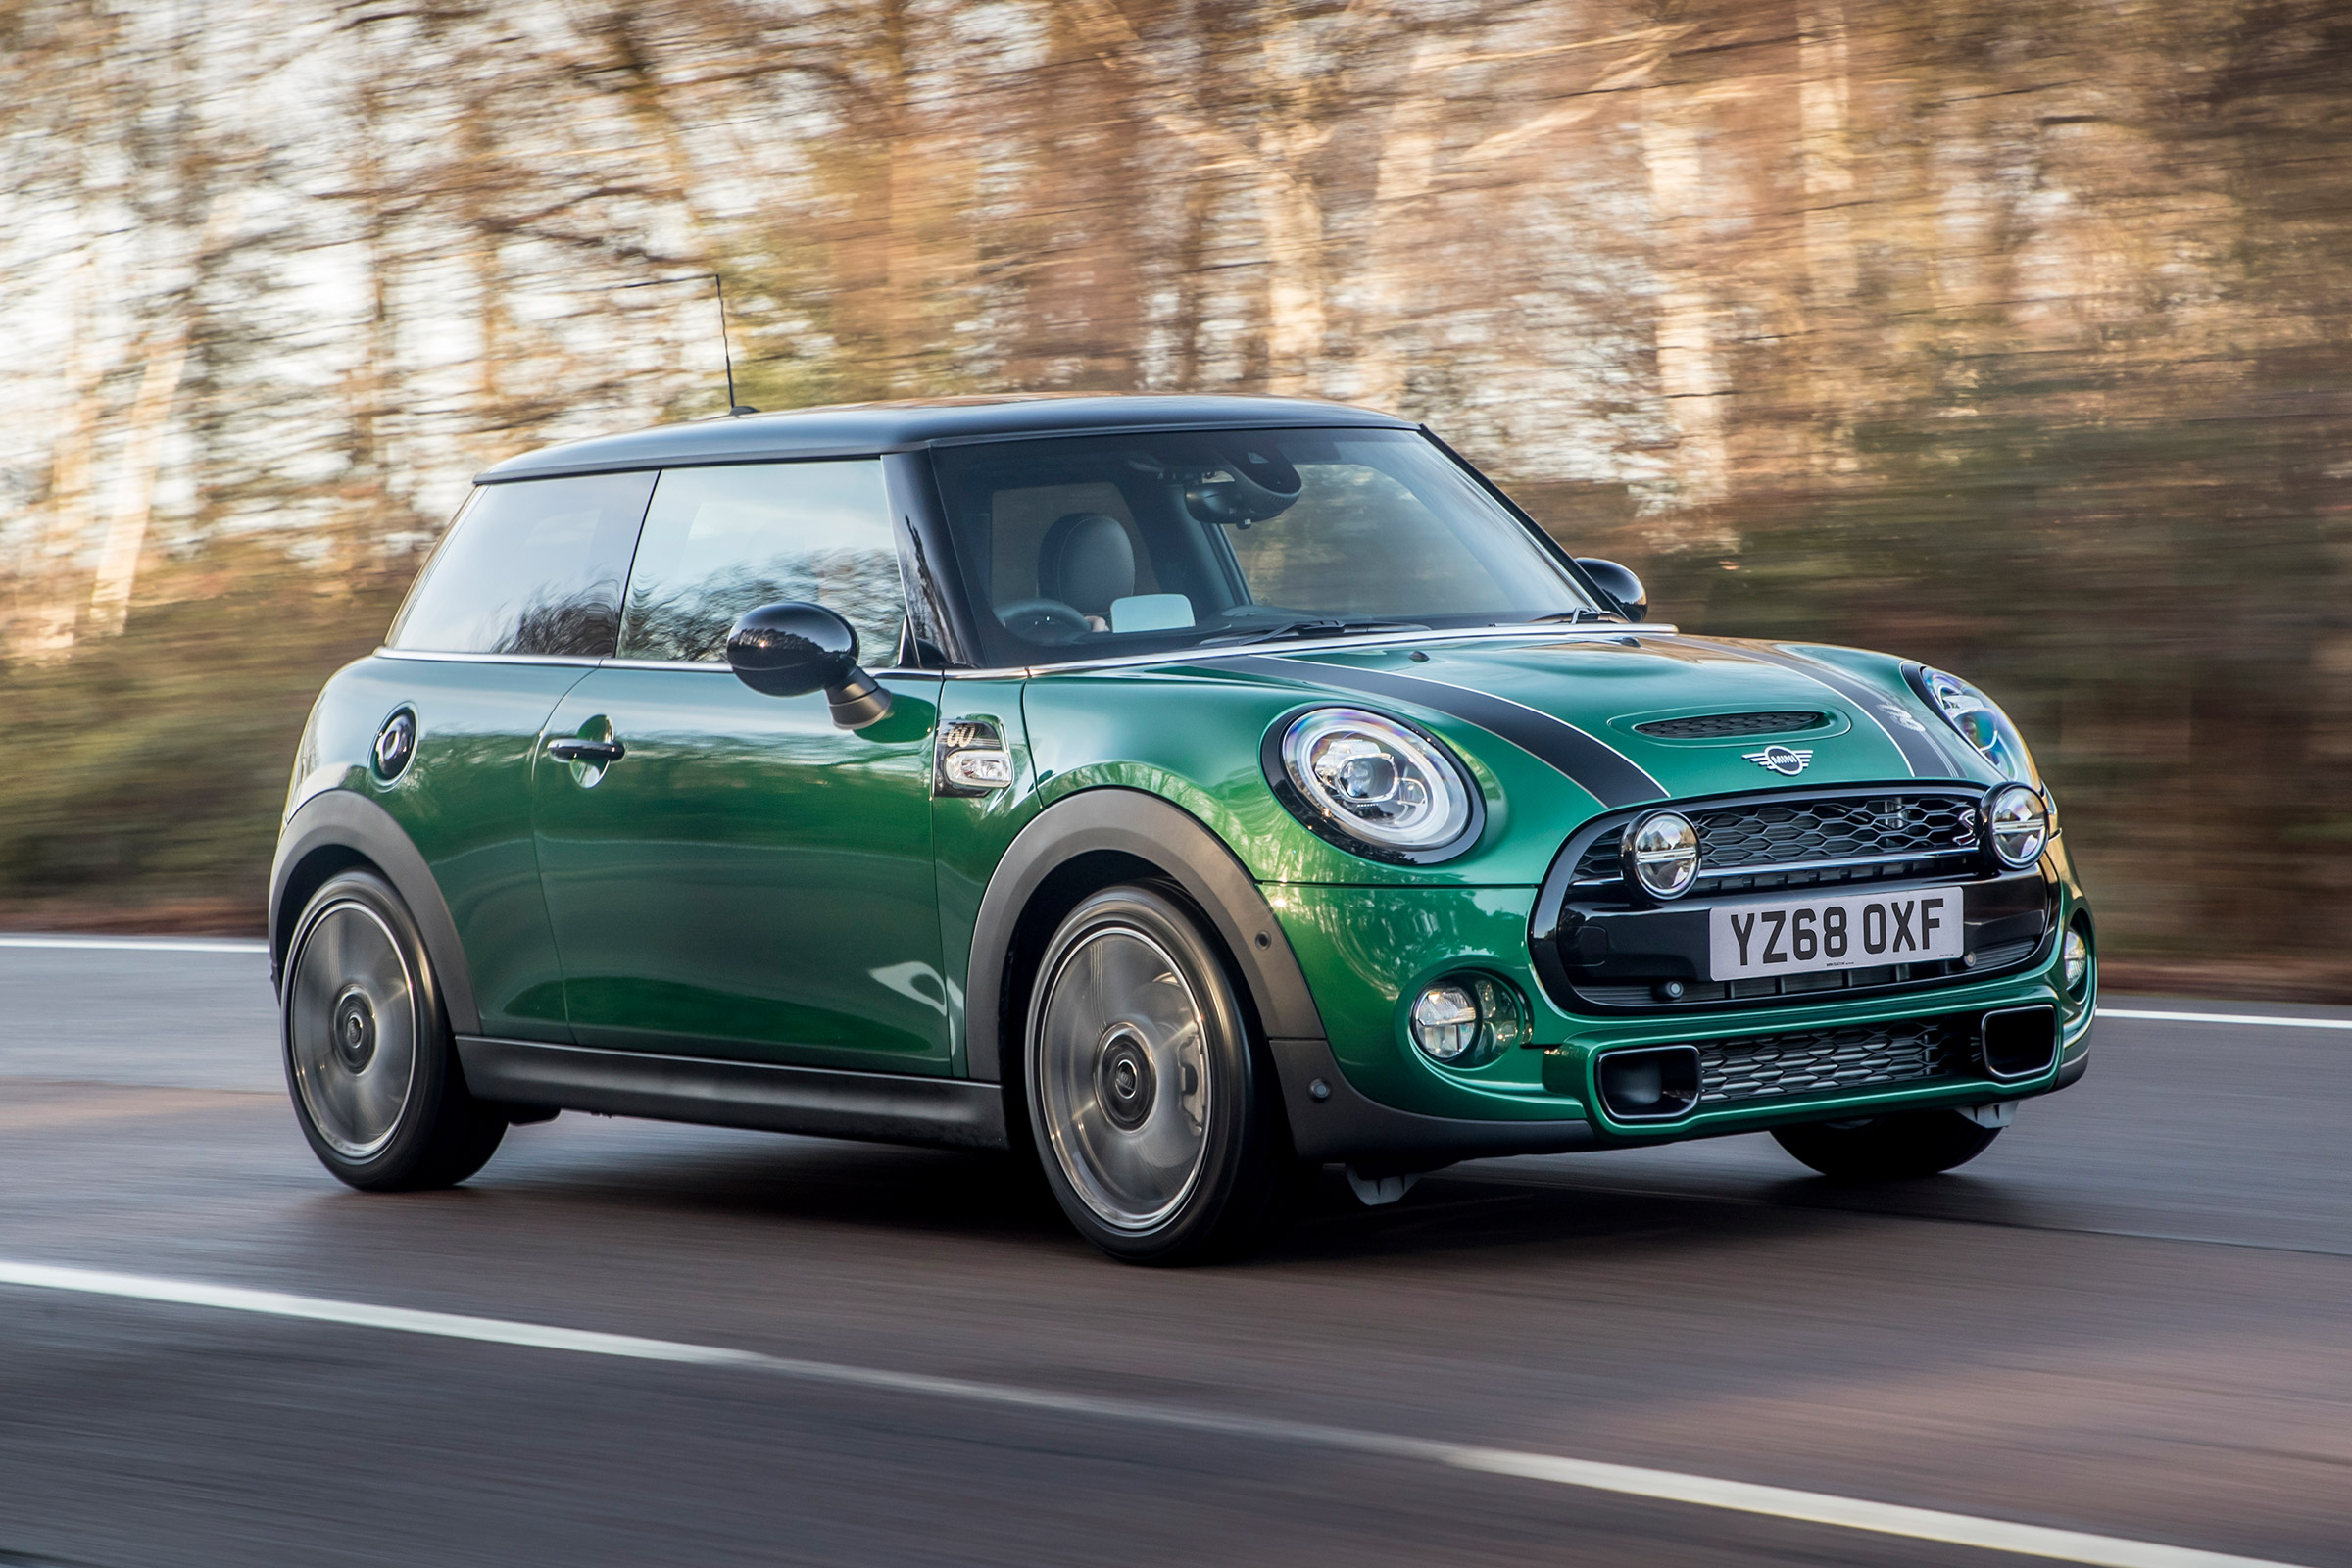 New MINI Cooper S 60 Years Edition revealed to celebrate 